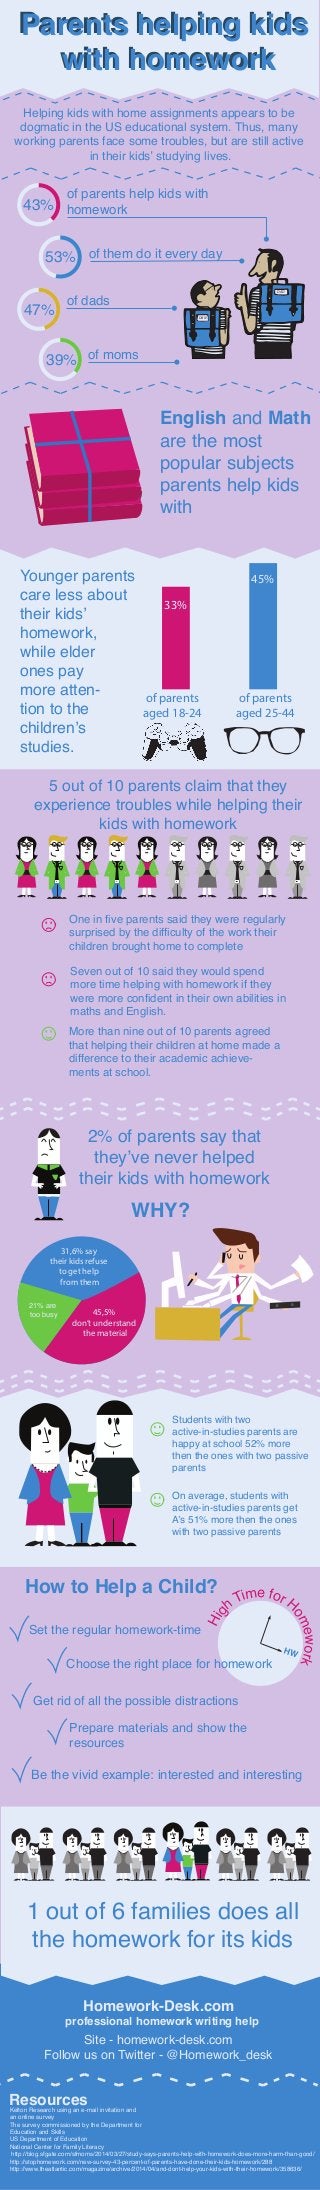 Helping kids with home assignments appears to be
dogmatic in the US educational system. Thus, many
working parents face some troubles, but are still active
in their kids’ studying lives.
Parents helping kids
with homework
English and Math
are the most
popular subjects
parents help kids
with
Parents helping kids
with homework
of parents
aged 18-24
of parents
aged 25-44
Younger parents
care less about
their kids’
homework,
while elder
ones pay
more atten-
tion to the
children’s
studies.
47%
39% of moms
of dads
DAN
DAD
5 out of 10 parents claim that they
experience troubles while helping their
kids with homework
One in five parents said they were regularly
surprised by the difficulty of the work their
children brought home to complete
Seven out of 10 said they would spend
more time helping with homework if they
were more confident in their own abilities in
maths and English.
More than nine out of 10 parents agreed
that helping their children at home made a
difference to their academic achieve-
ments at school.
2% of parents say that
they’ve never helped
their kids with homework
WHY?
31,6% say
their kids refuse
to get help
from them
45,5%
don’t understand
the material
21% are
too busy
Students with two
active-in-studies parents are
happy at school 52% more
then the ones with two passive
parents
On average, students with
active-in-studies parents get
A’s 51% more then the ones
with two passive parents
How to Help a Child?
Set the regular homework-time
Get rid of all the possible distractions
Prepare materials and show the
resources
Be the vivid example: interested and interesting
Hig
h Time for H
omework
HW
Choose the right place for homework
1 out of 6 families does all
the homework for its kids
Homework-Desk.com
professional homework writing help
53% of them do it every day
43%
of parents help kids with
homework
33%
45%
Site - homework-desk.com
Follow us on Twitter - @Homework_desk
ResourcesKelton Research using an e-mail invitation and
an online survey
The survey commissioned by the Department for
Education and Skills
US Department of Education
National Center for Family Literacy
http://blog.sfgate.com/sfmoms/2014/03/27/study-says-parents-help-with-homework-does-more-harm-than-good/
http://stophomework.com/new-survey-43-percent-of-parents-have-done-their-kids-homework/288
http://www.theatlantic.com/magazine/archive/2014/04/and-dont-help-your-kids-with-their-homework/358636/
 